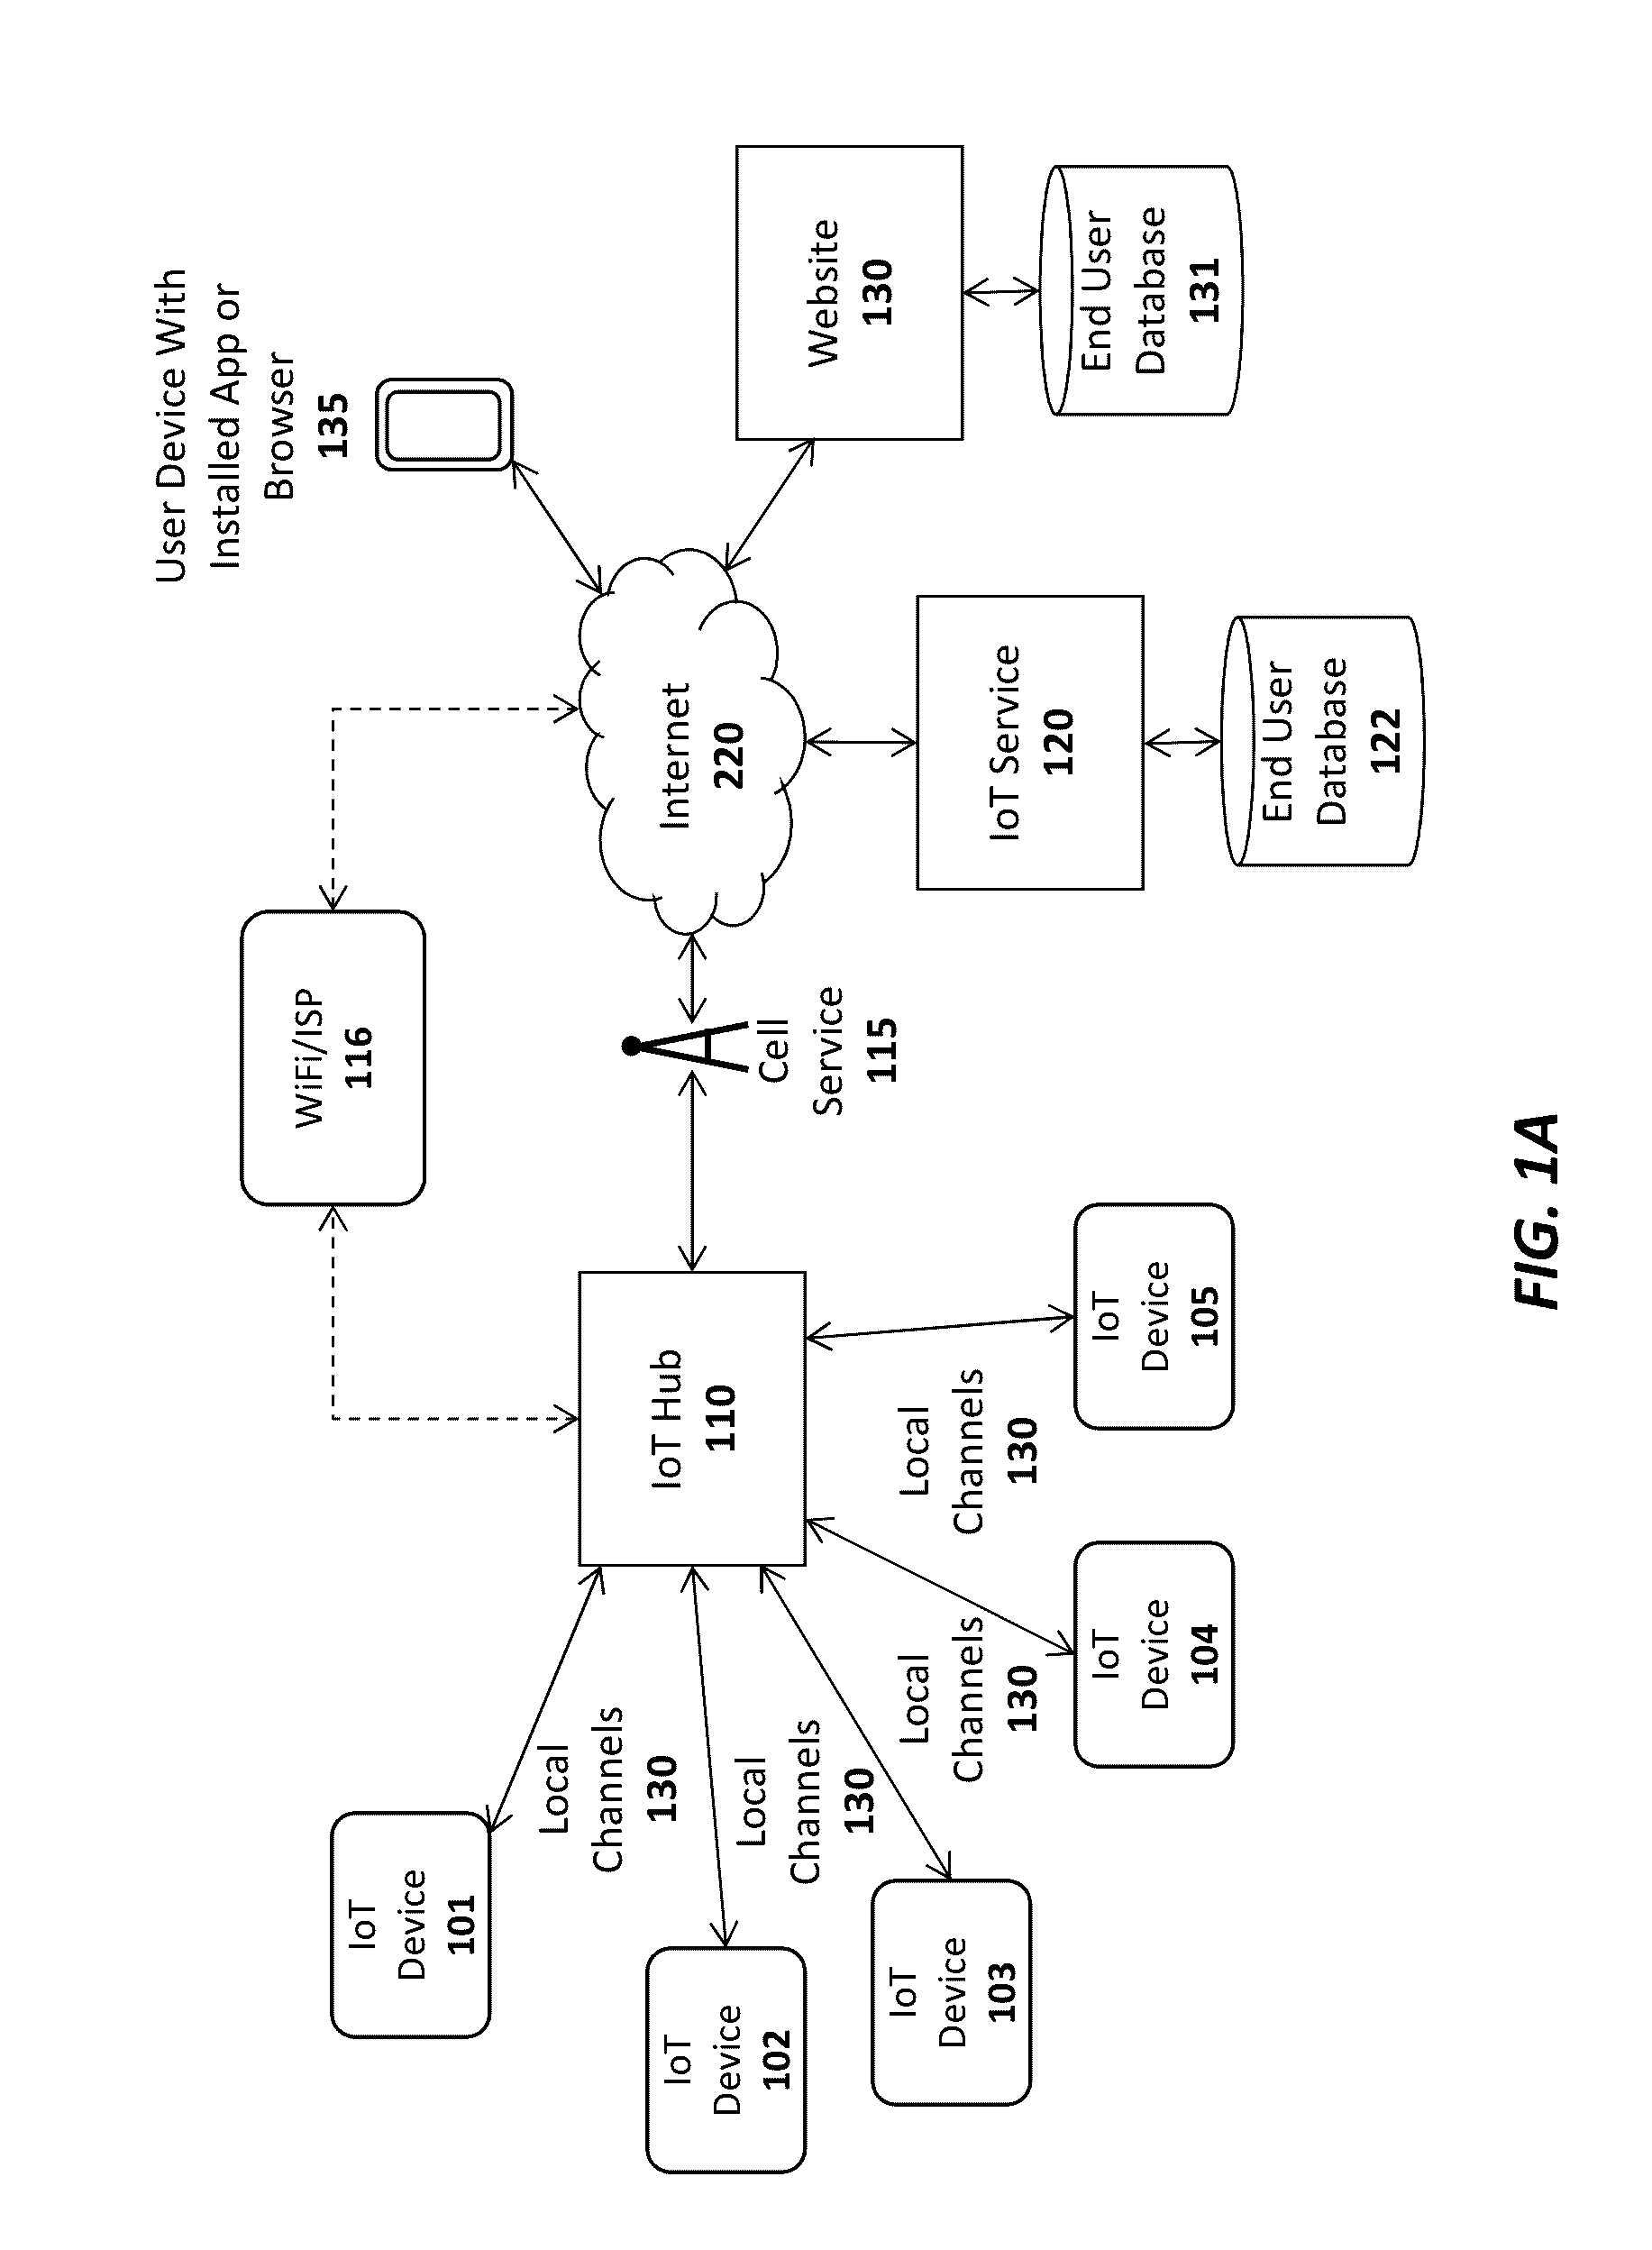 Apparatus and method for a dynamic scan interval for a wireless device